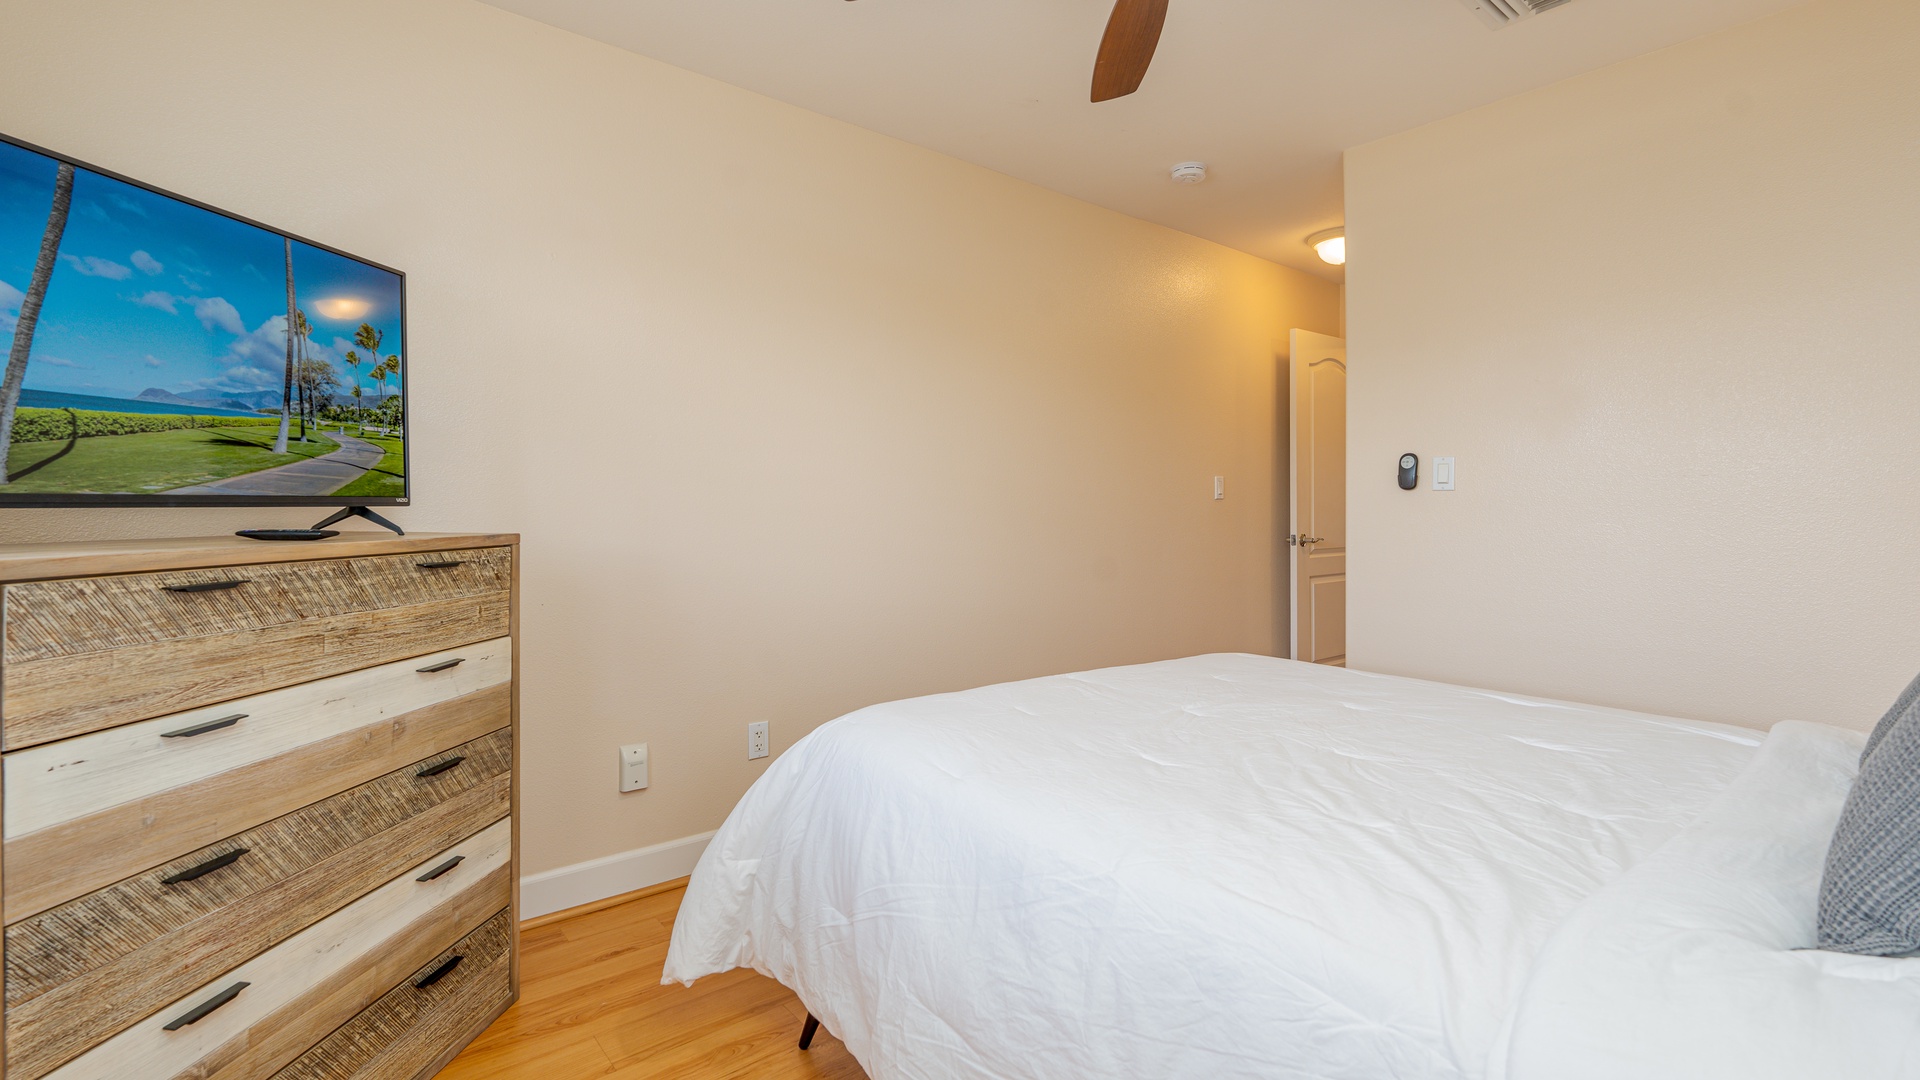 Kapolei Vacation Rentals, Hillside Villas 1496-2 - The second guest bedroom also features a dresser and ceiling fan.